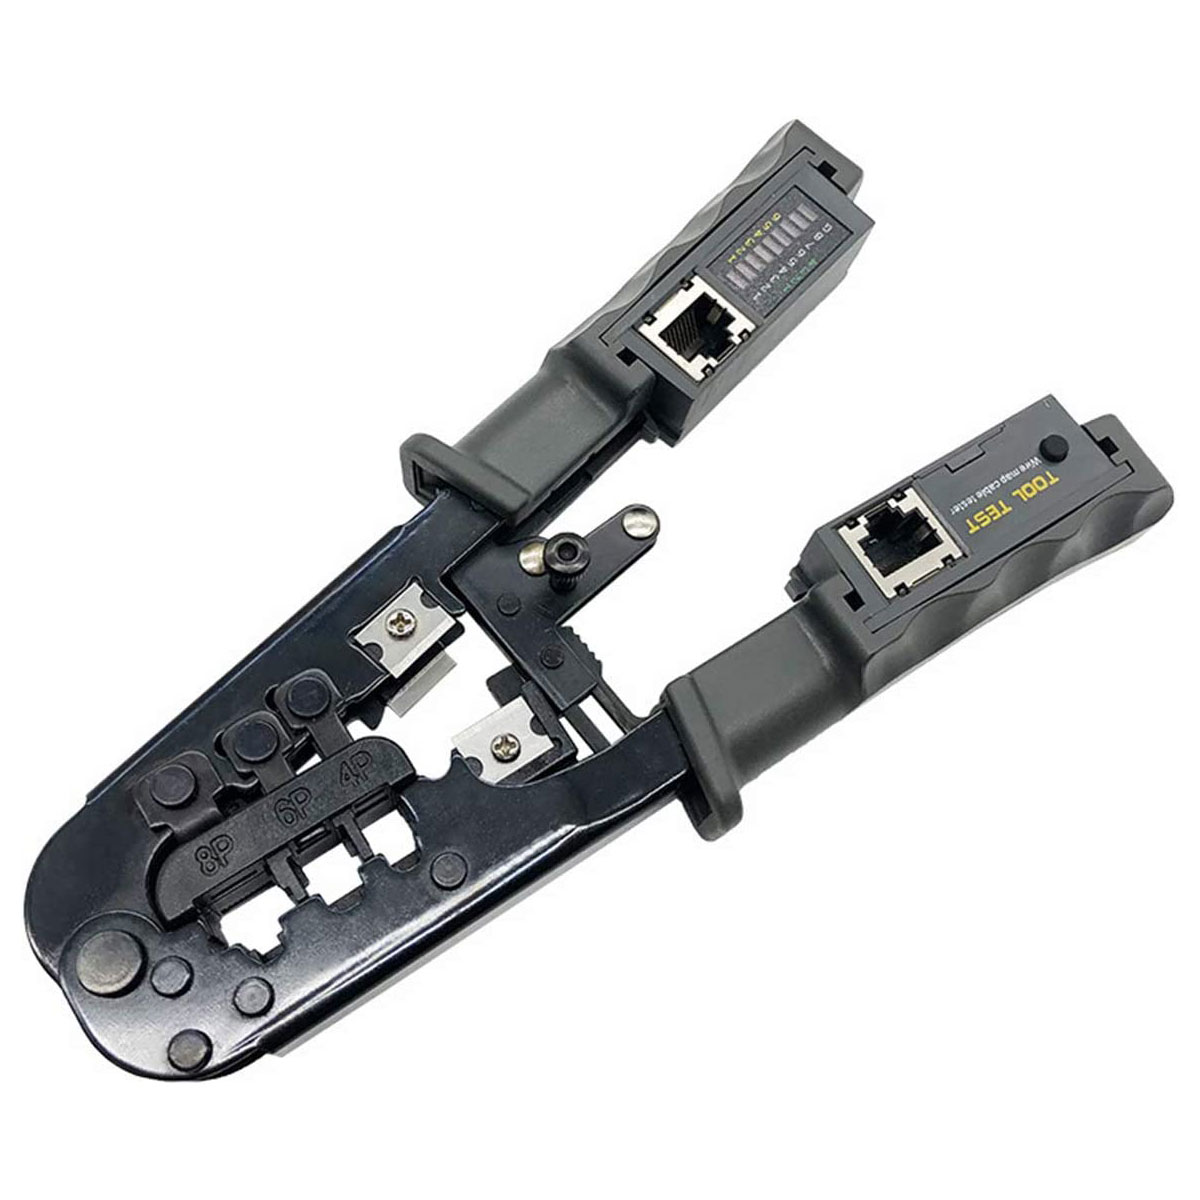 SR 6P/8P Wire Cutter Tool Test Crimping Pliers 2 in 1 RJ45 Network LAN Cable Crimper Pliers Cable Tester Cable Pliers